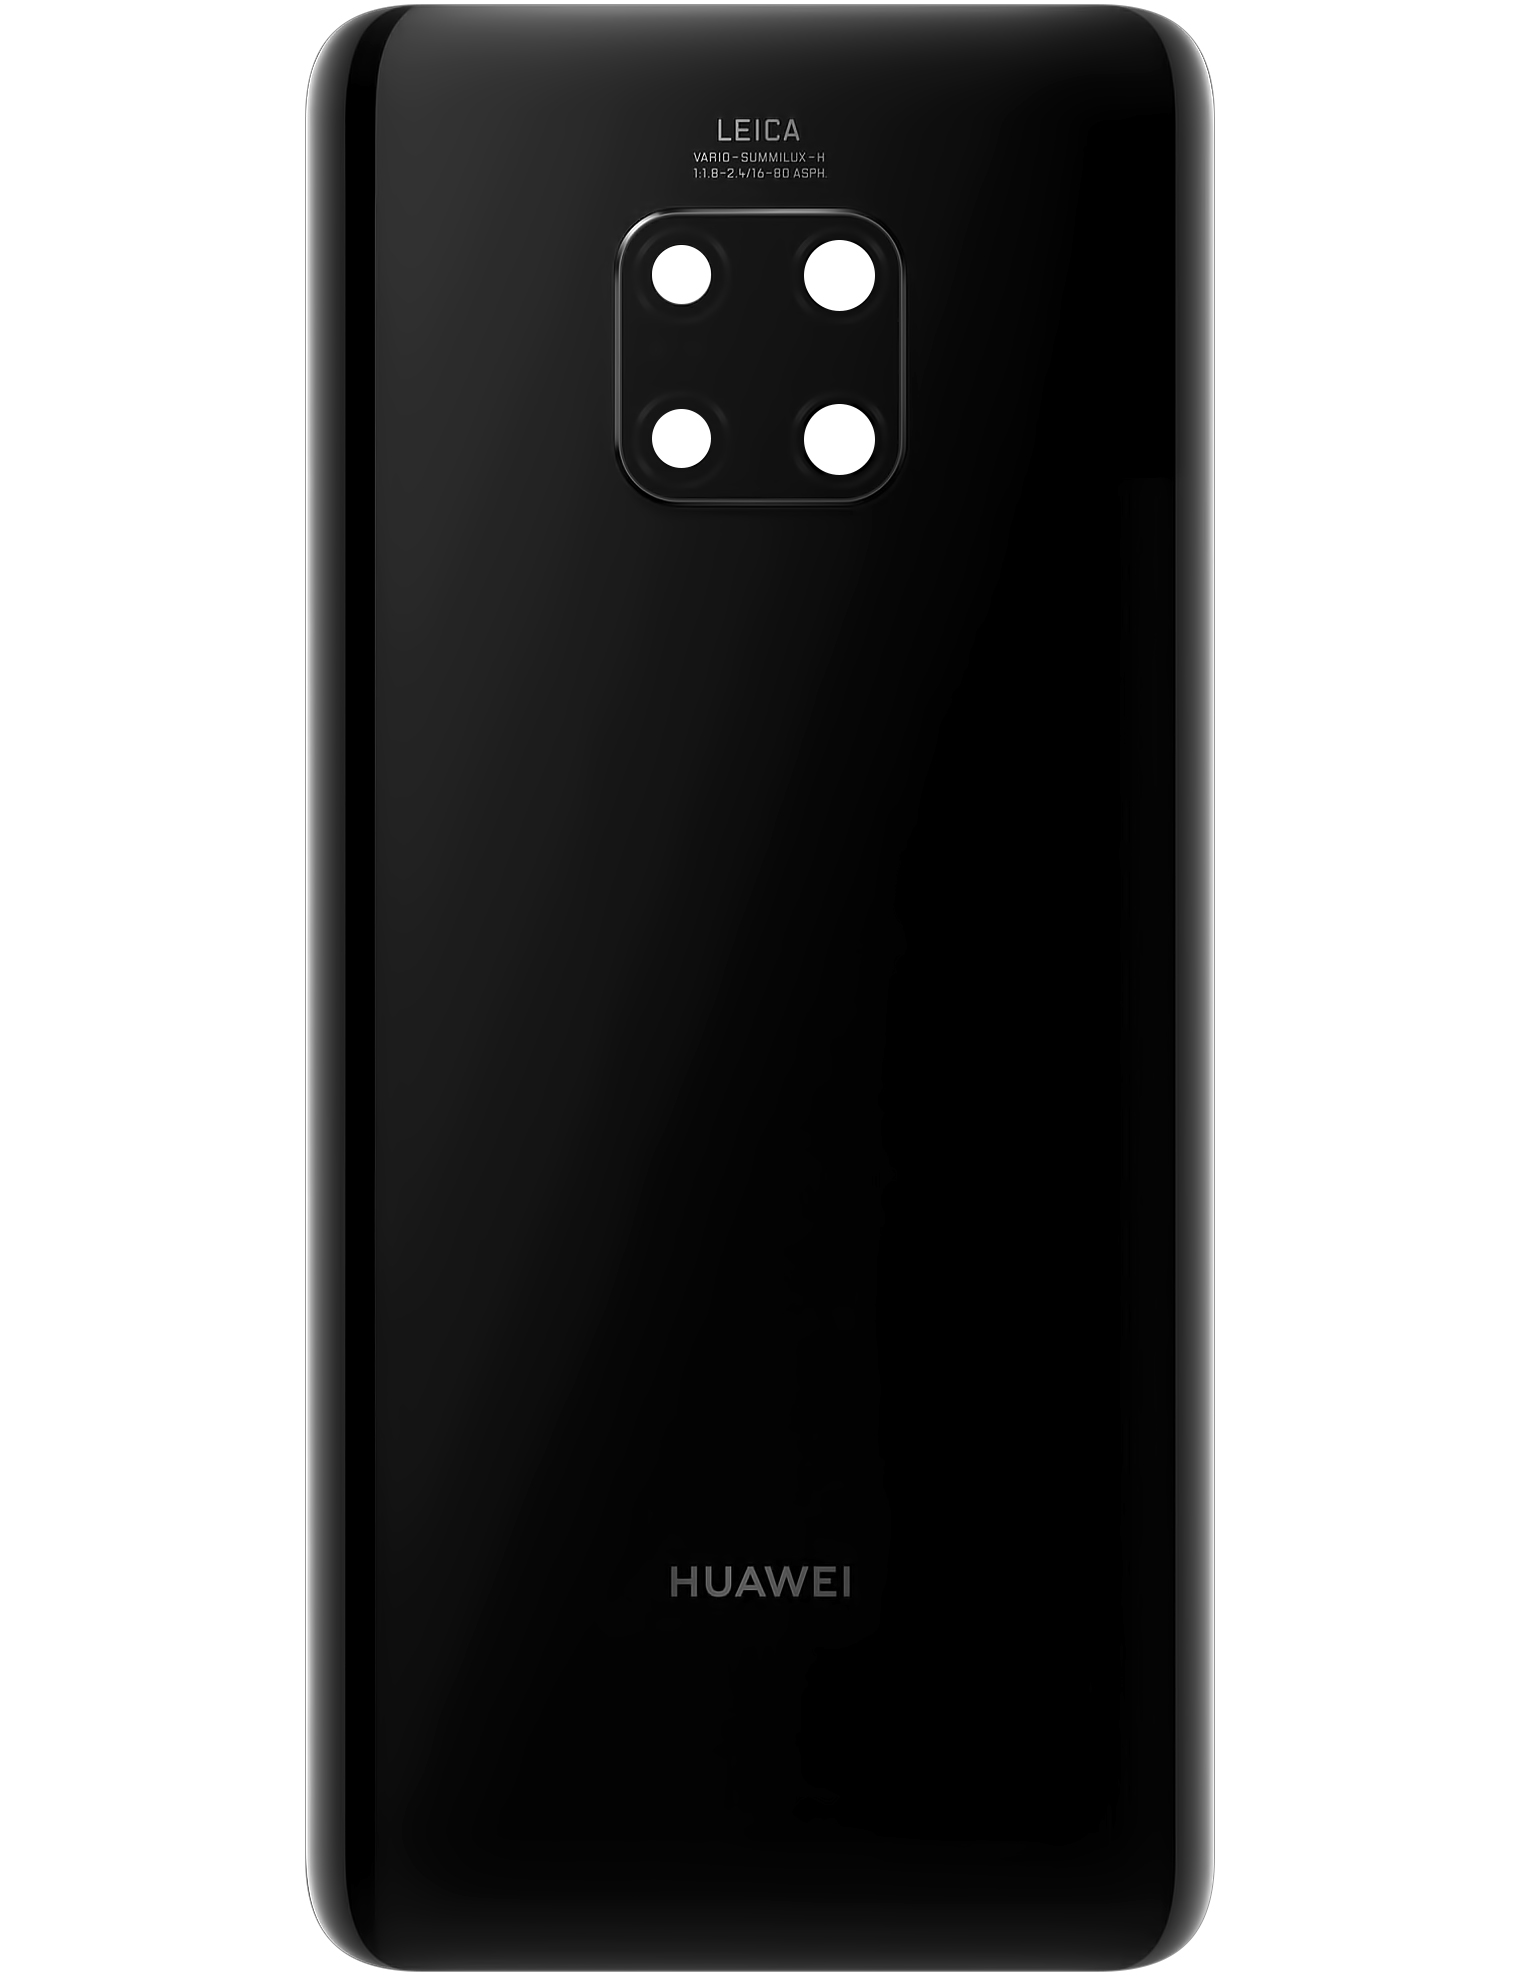 battery-cover-for-huawei-mate-20-pro-black-02352gcg-